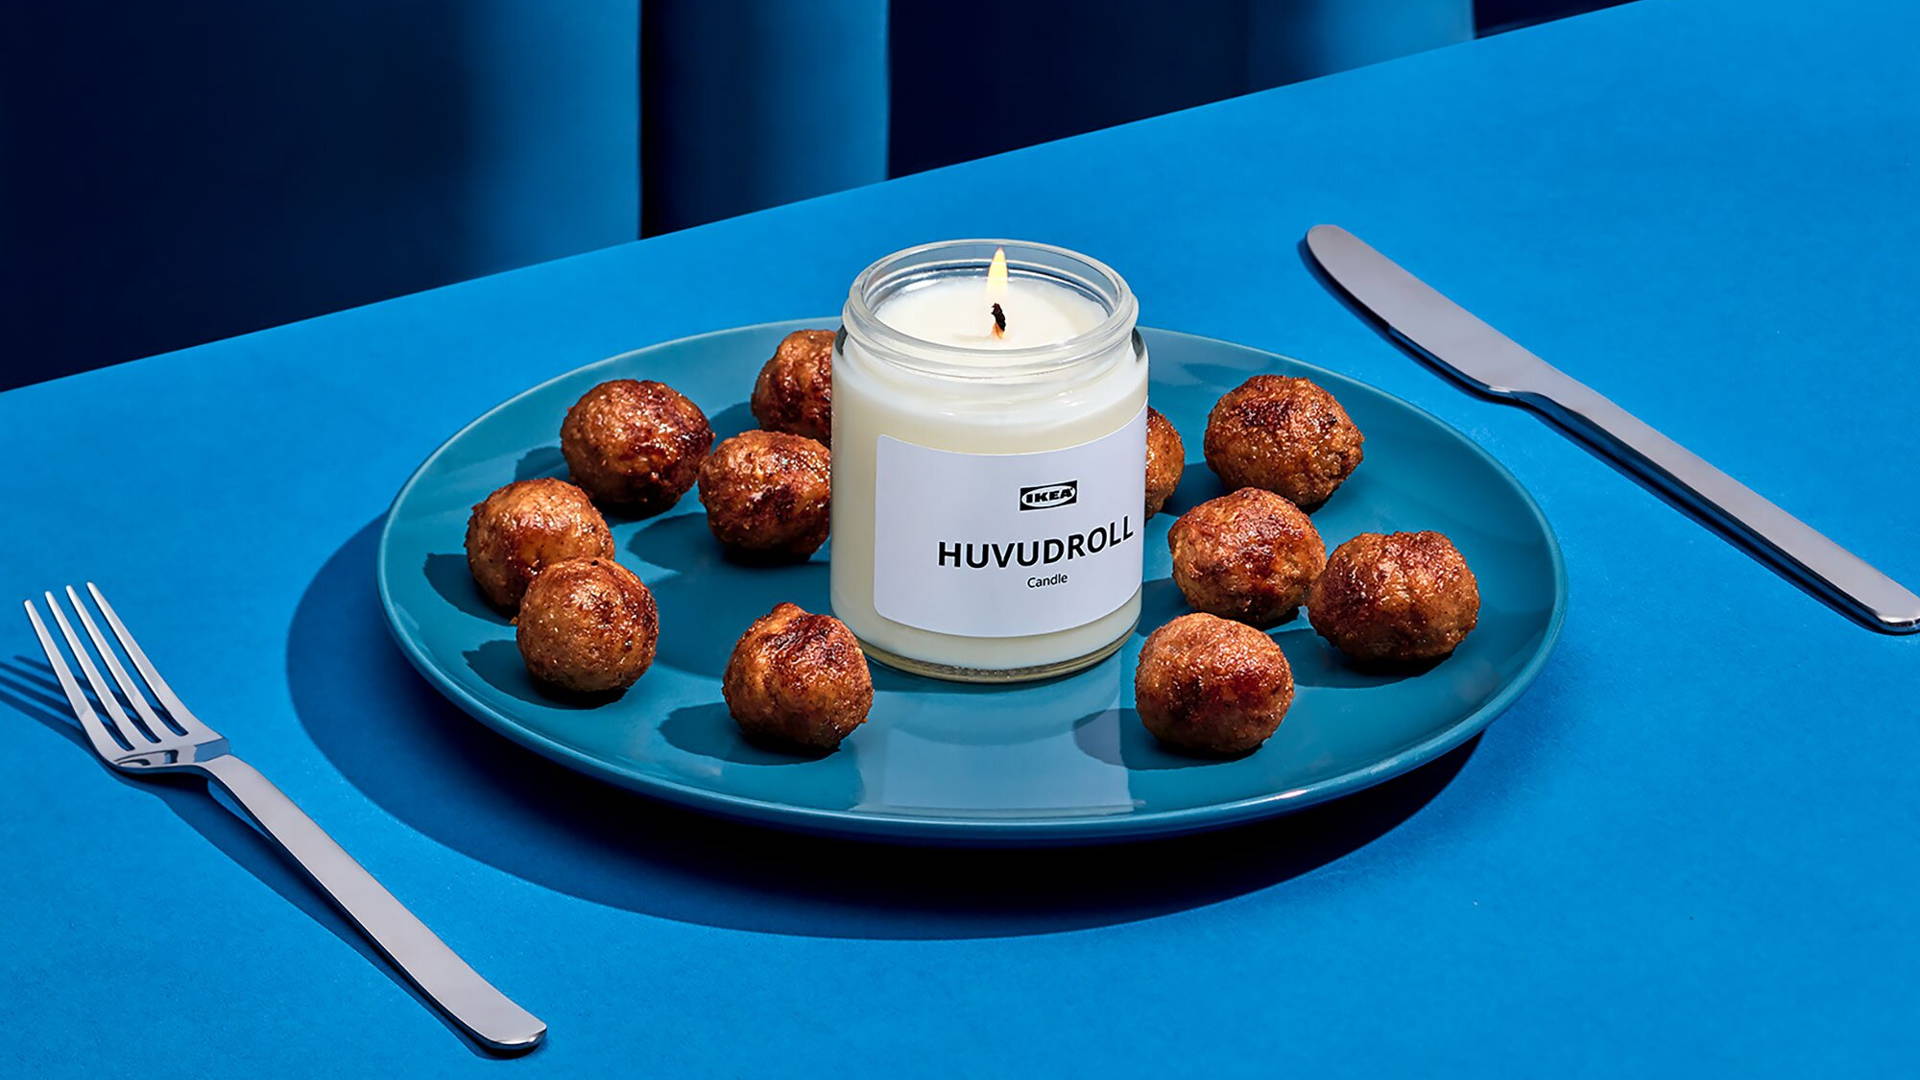 Featured image for IKEA Wants to Make Your Room Smell Beefier With Meatball-Inspired Candle